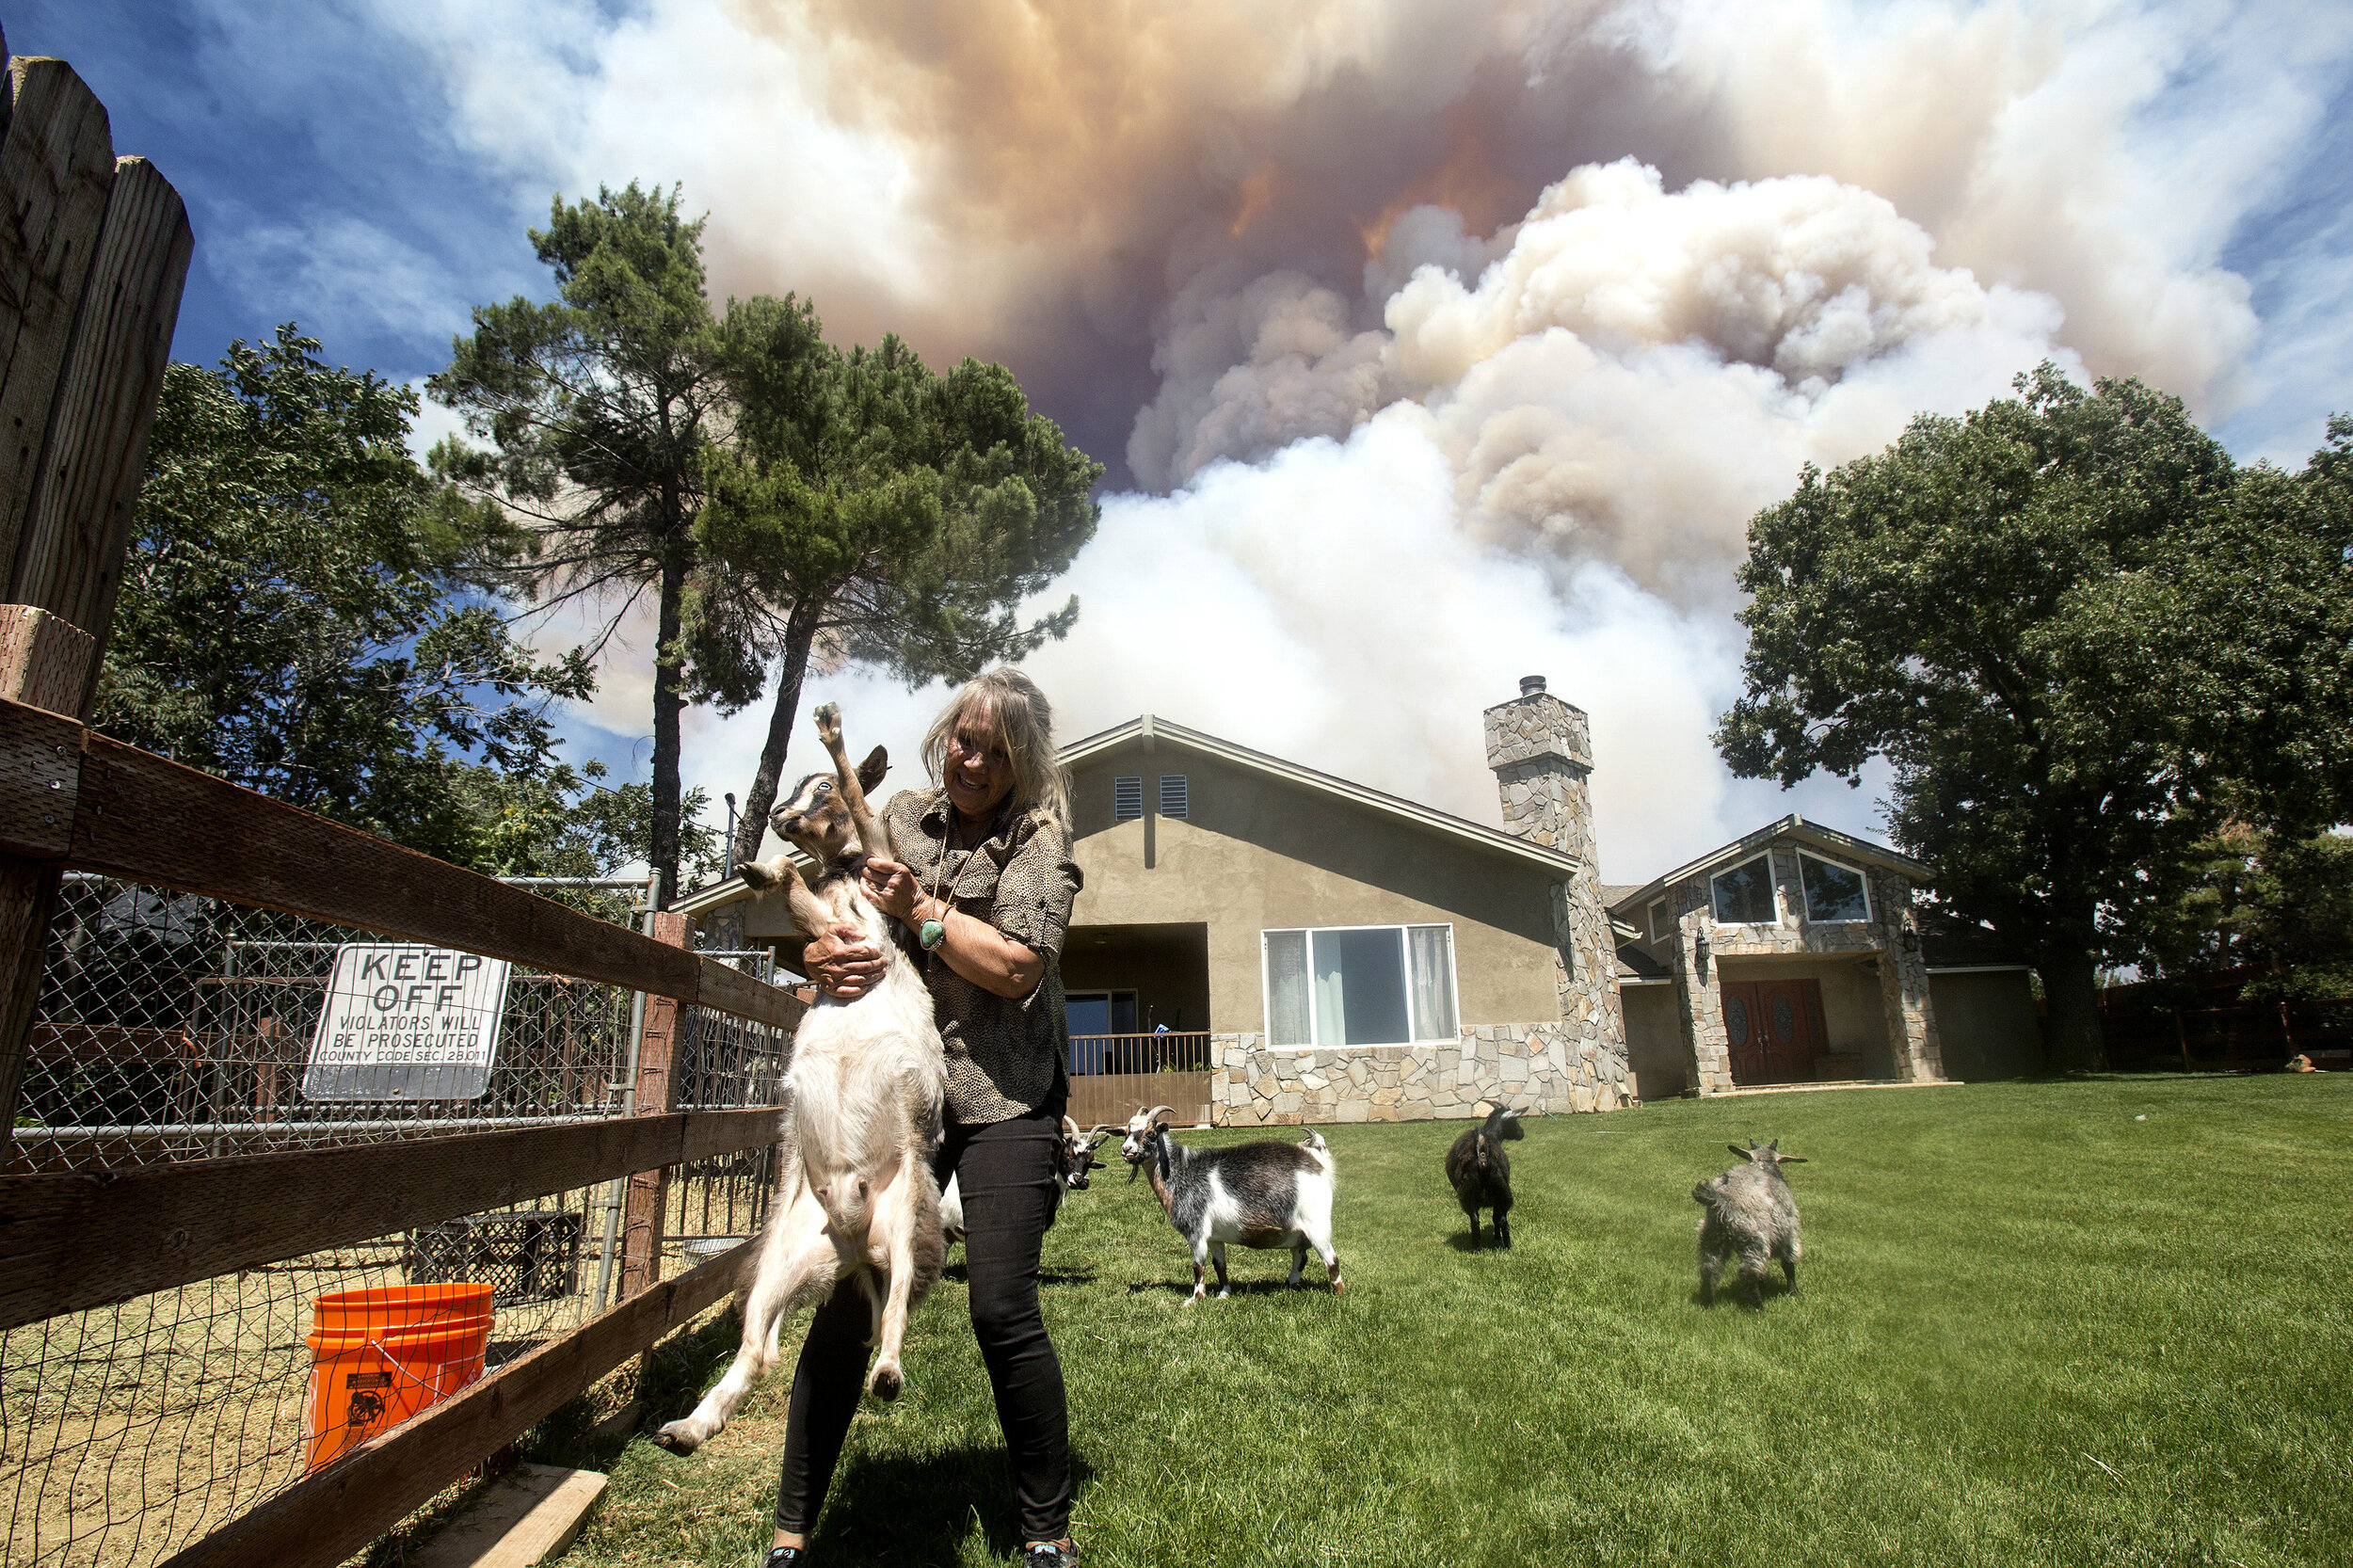  Diane Brickley comes back home to take care her goats after evacuated as a brush fire burns nearby at the Apple Fire in Cherry Valley, Calif., Saturday, Aug. 1, 2020. The 2020 California wildfire season was characterized by a record-setting year of 